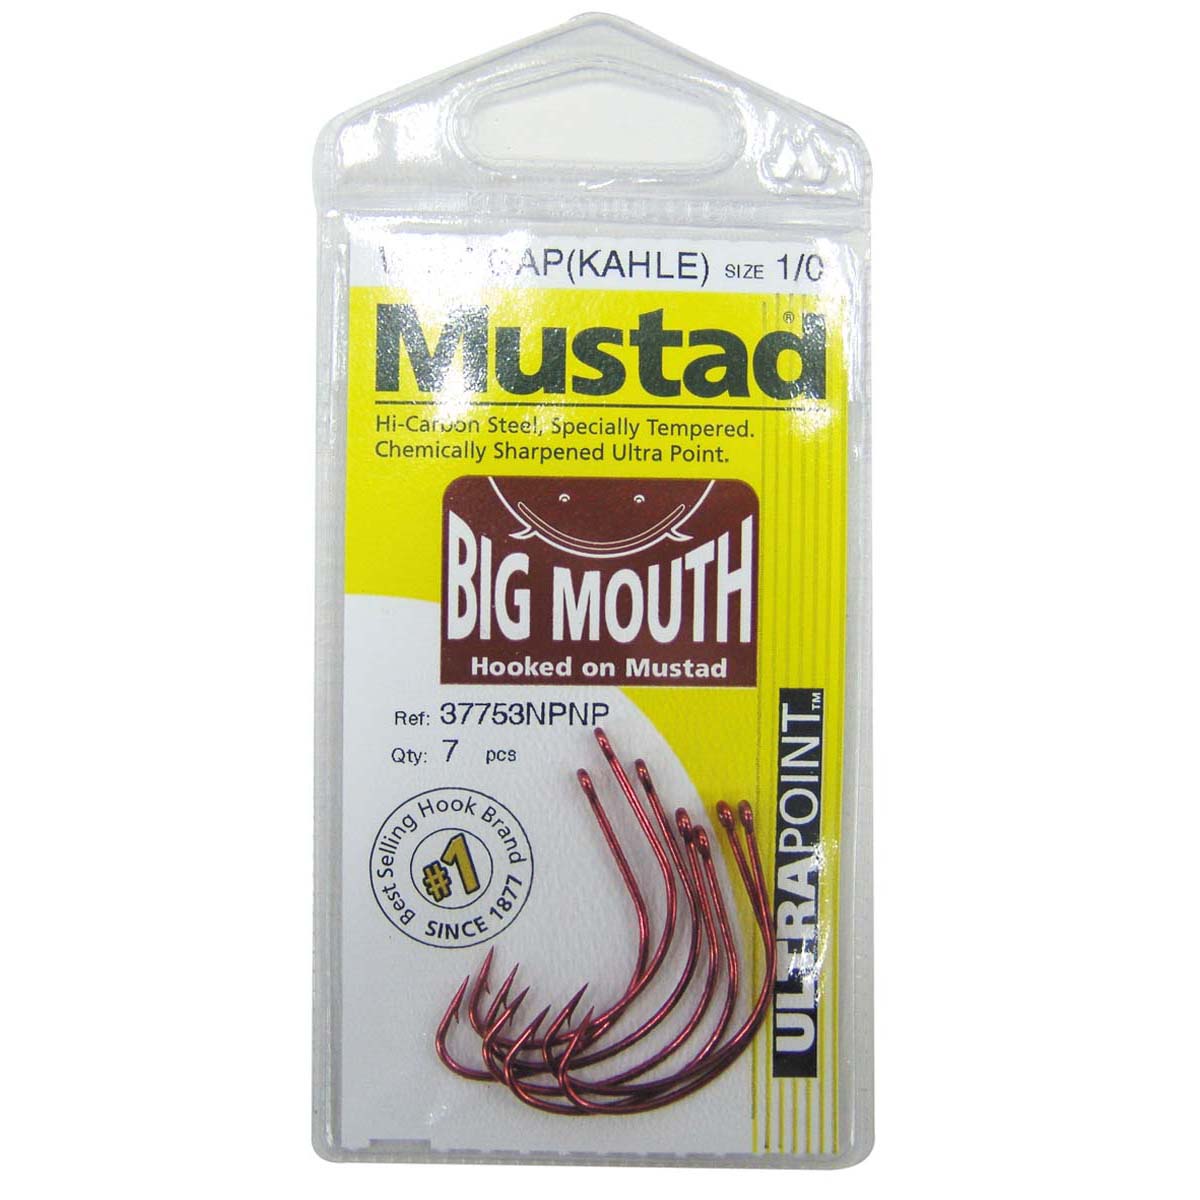 Mustad Big Mouth Hooks 4 / 0 6 Pack